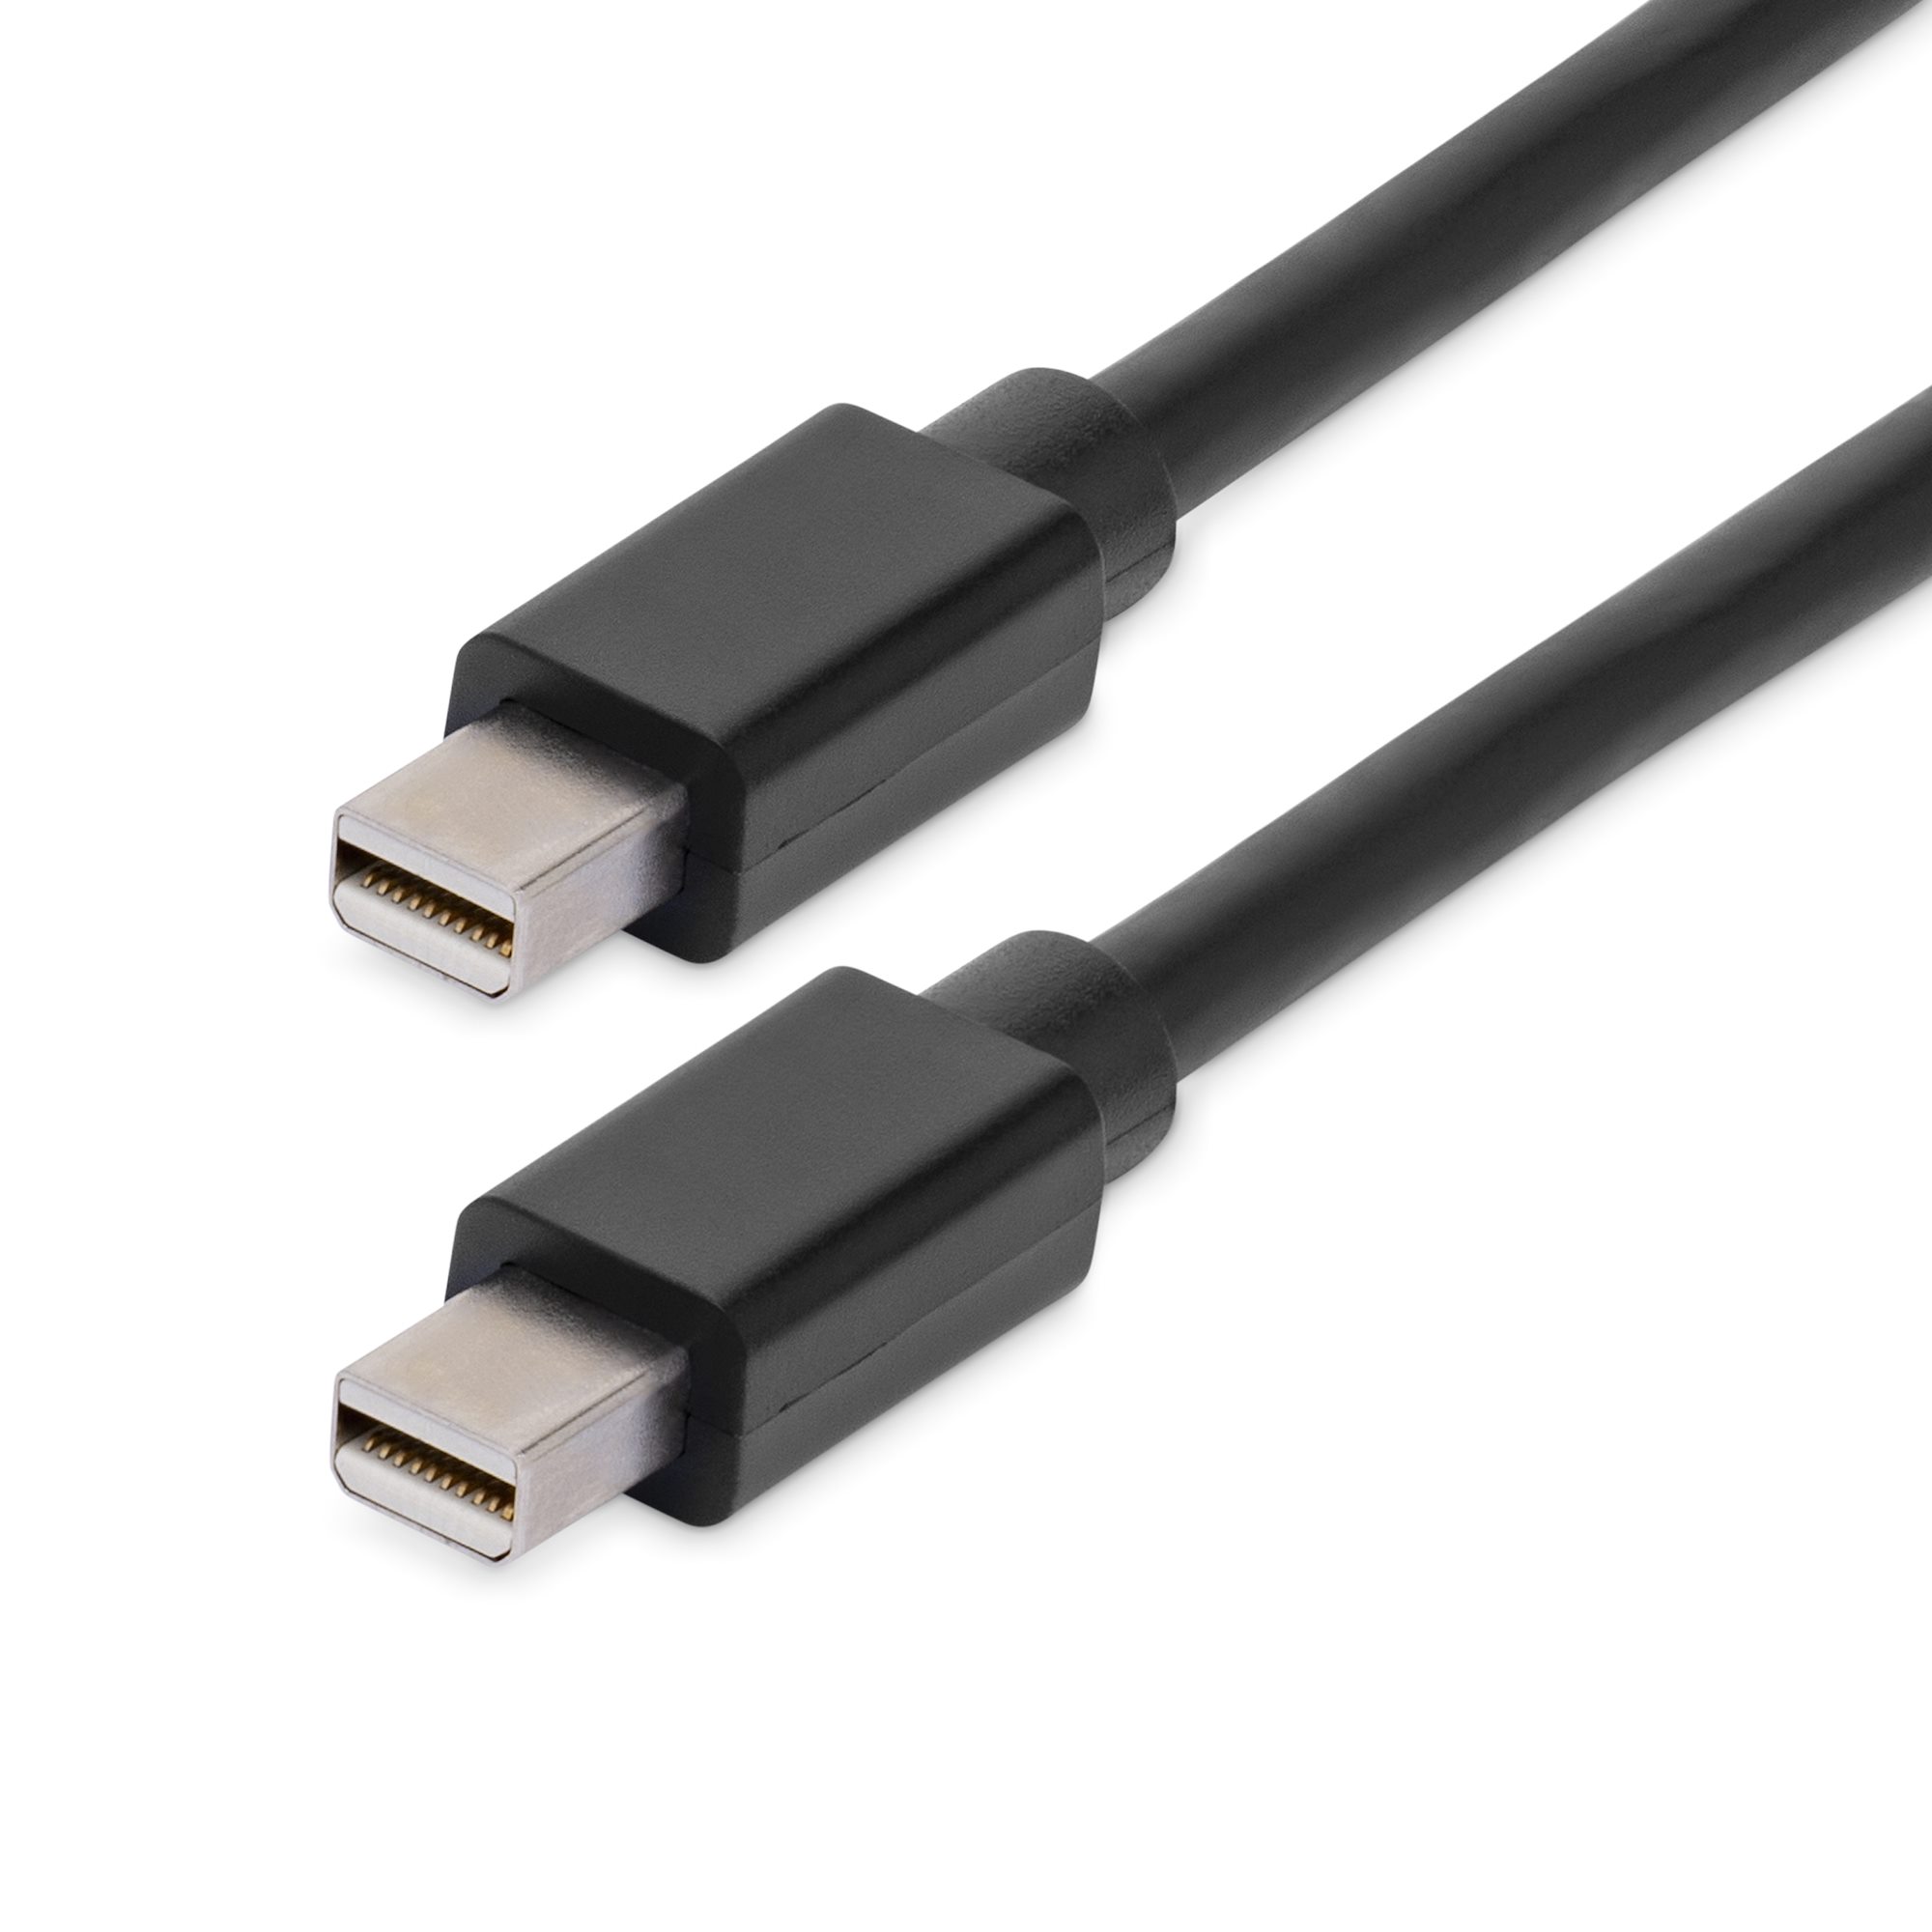 10ft (3m) Mini DisplayPort to HDMI Cable - 4K 30Hz Video - mDP to HDMI  Adapter Cable - Mini DP or Thunderbolt 1/2 Mac/PC to HDMI Monitor/Display -  mDP